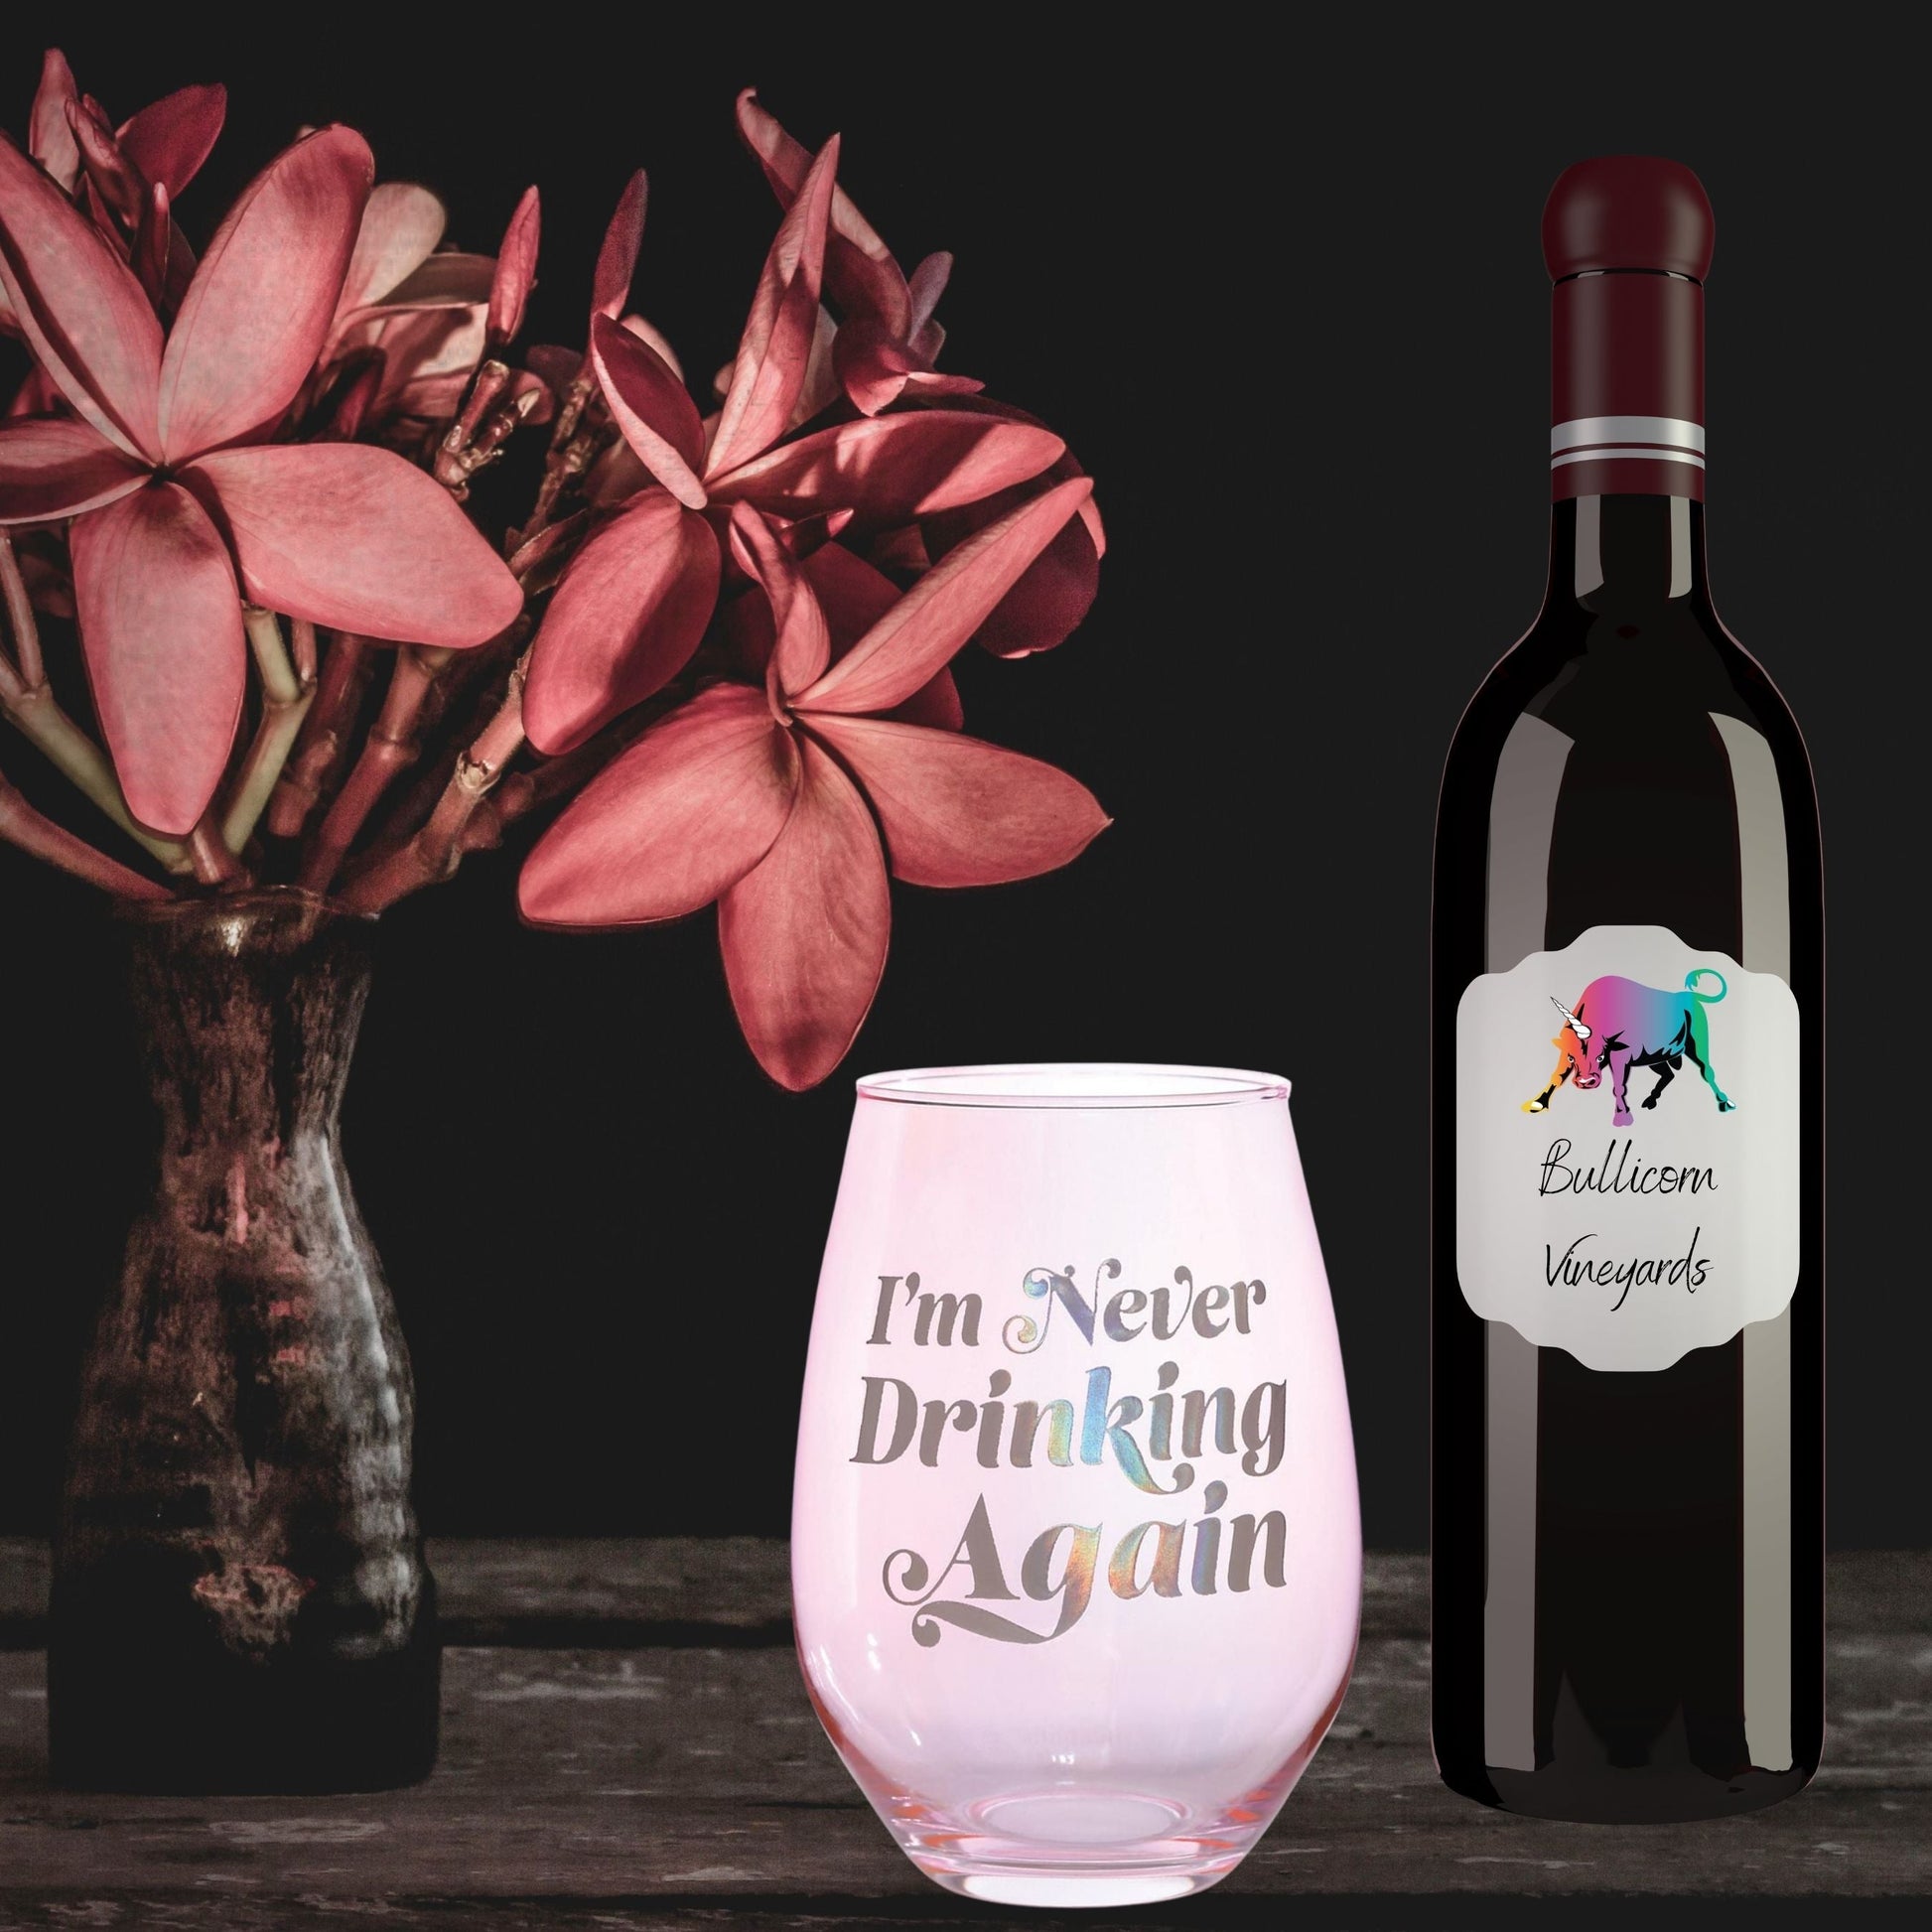 I'm Never Drinking Again Jumbo Stemless Wine Glass in Pink and Iridescent | 30 oz | Holds an entire bottle of wine